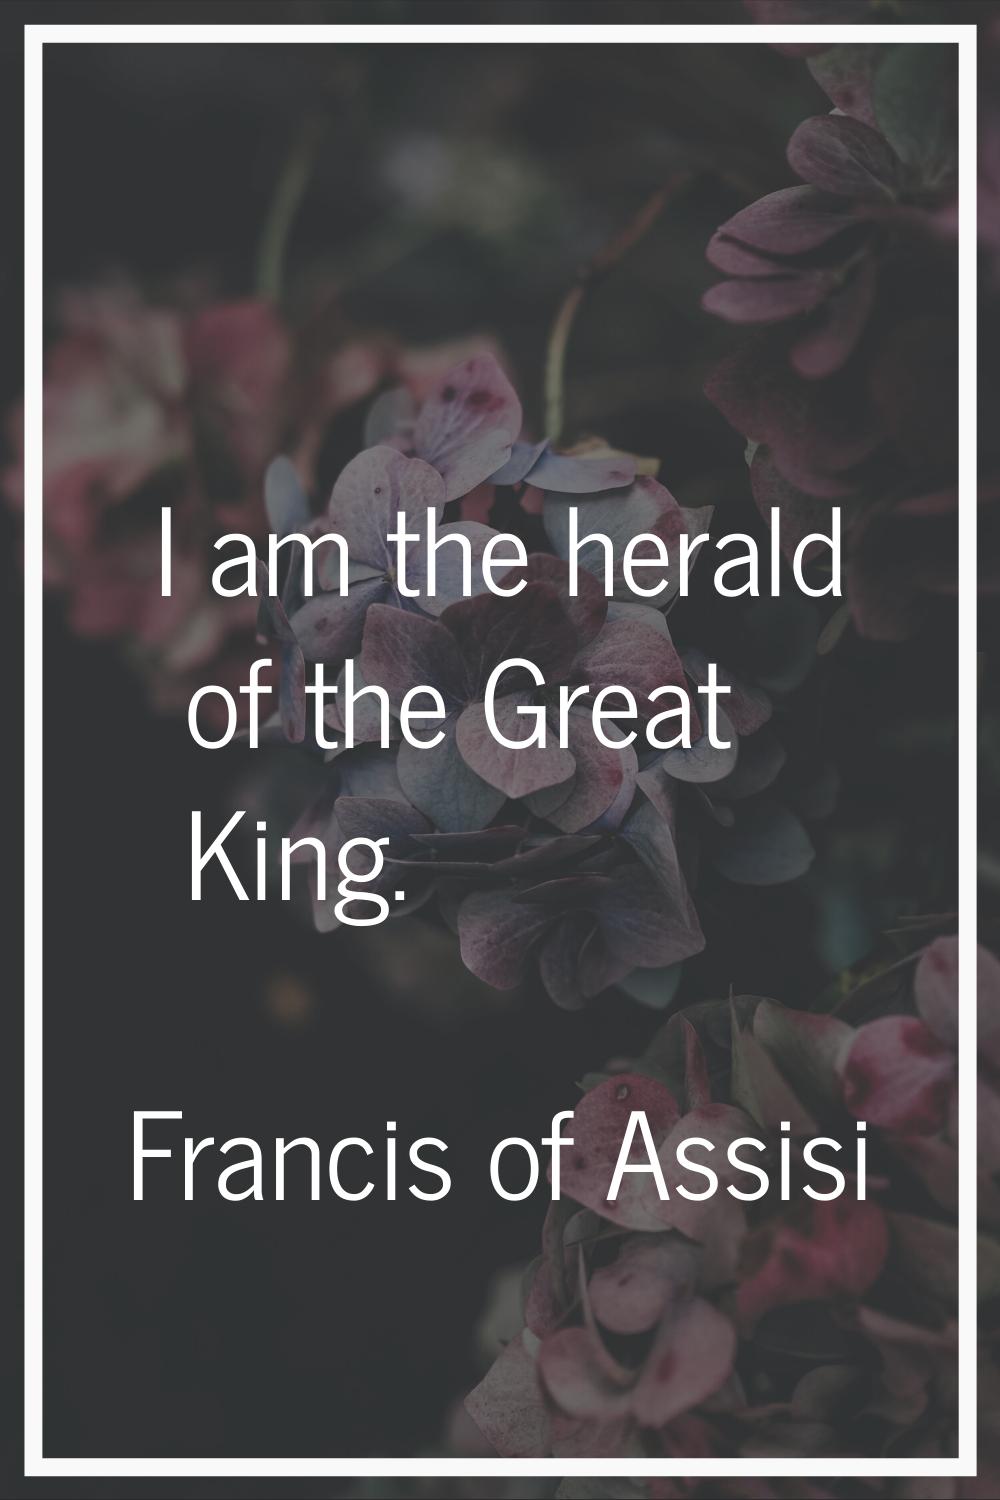 I am the herald of the Great King.